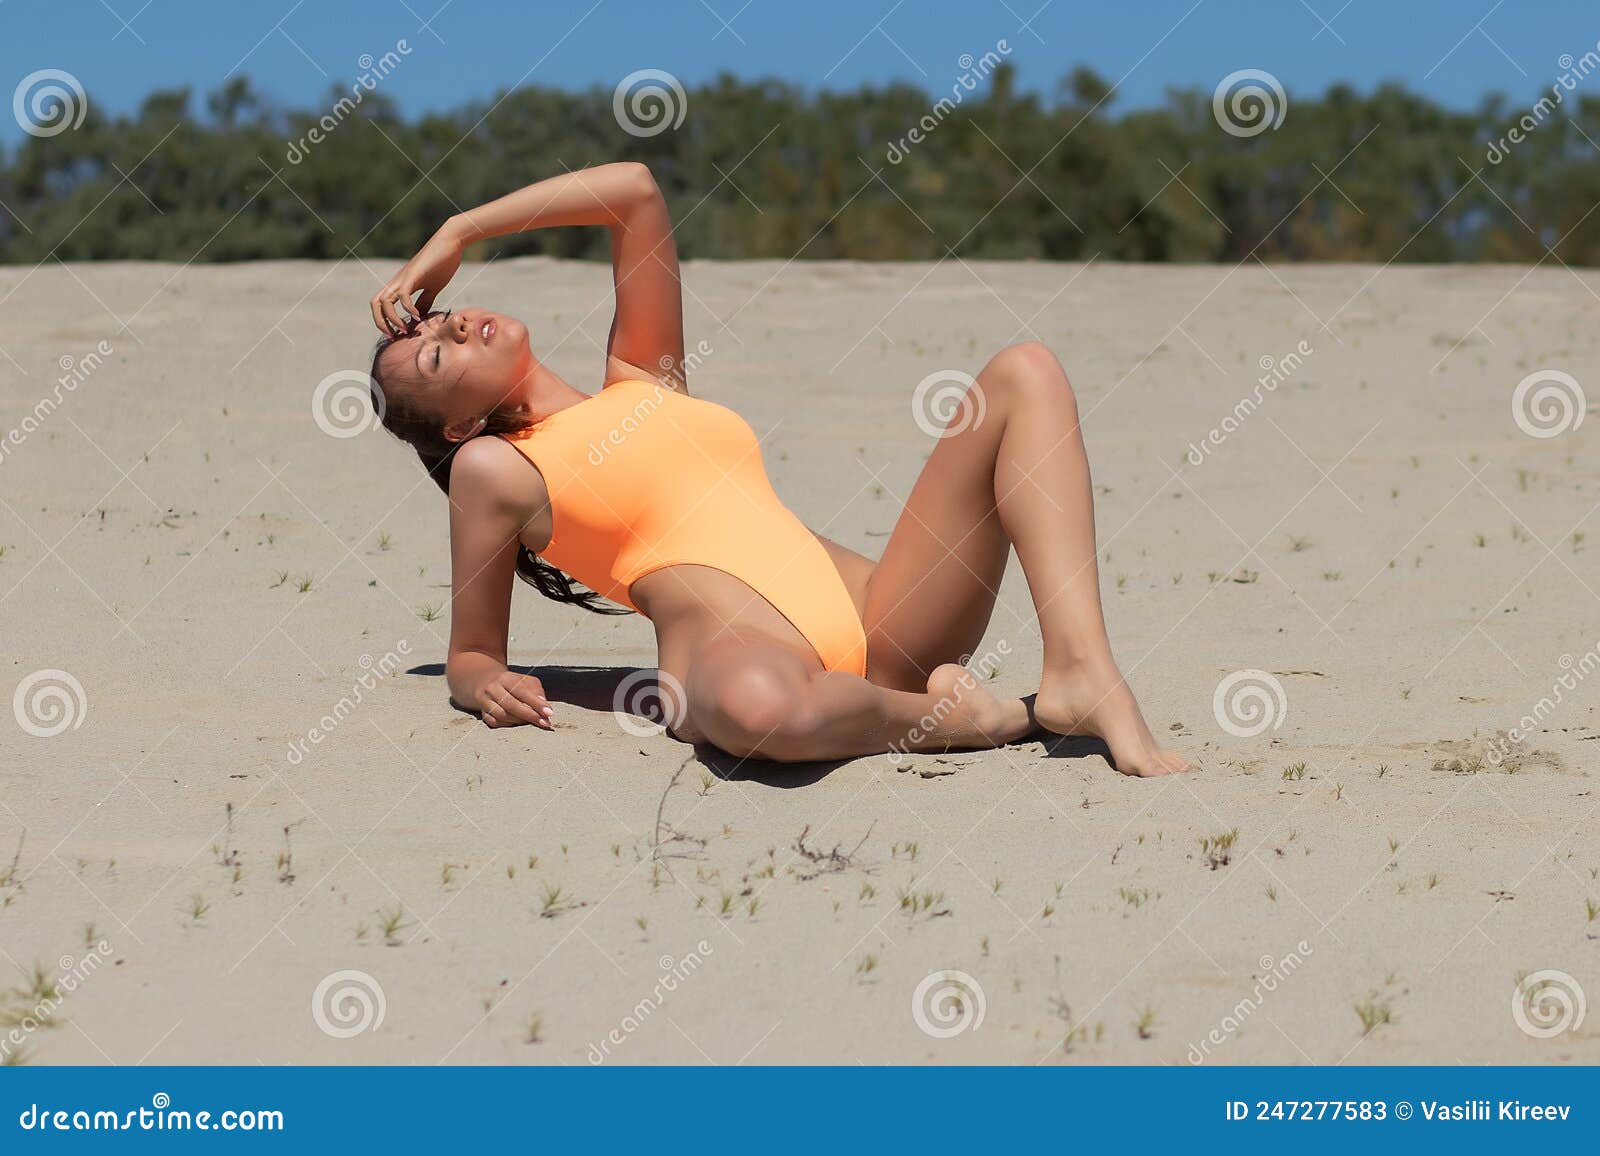 https://thumbs.dreamstime.com/z/attractive-woman-sexy-swimsuit-relaxing-beach-full-body-side-view-seductive-young-tanned-female-model-fashionable-247277583.jpg